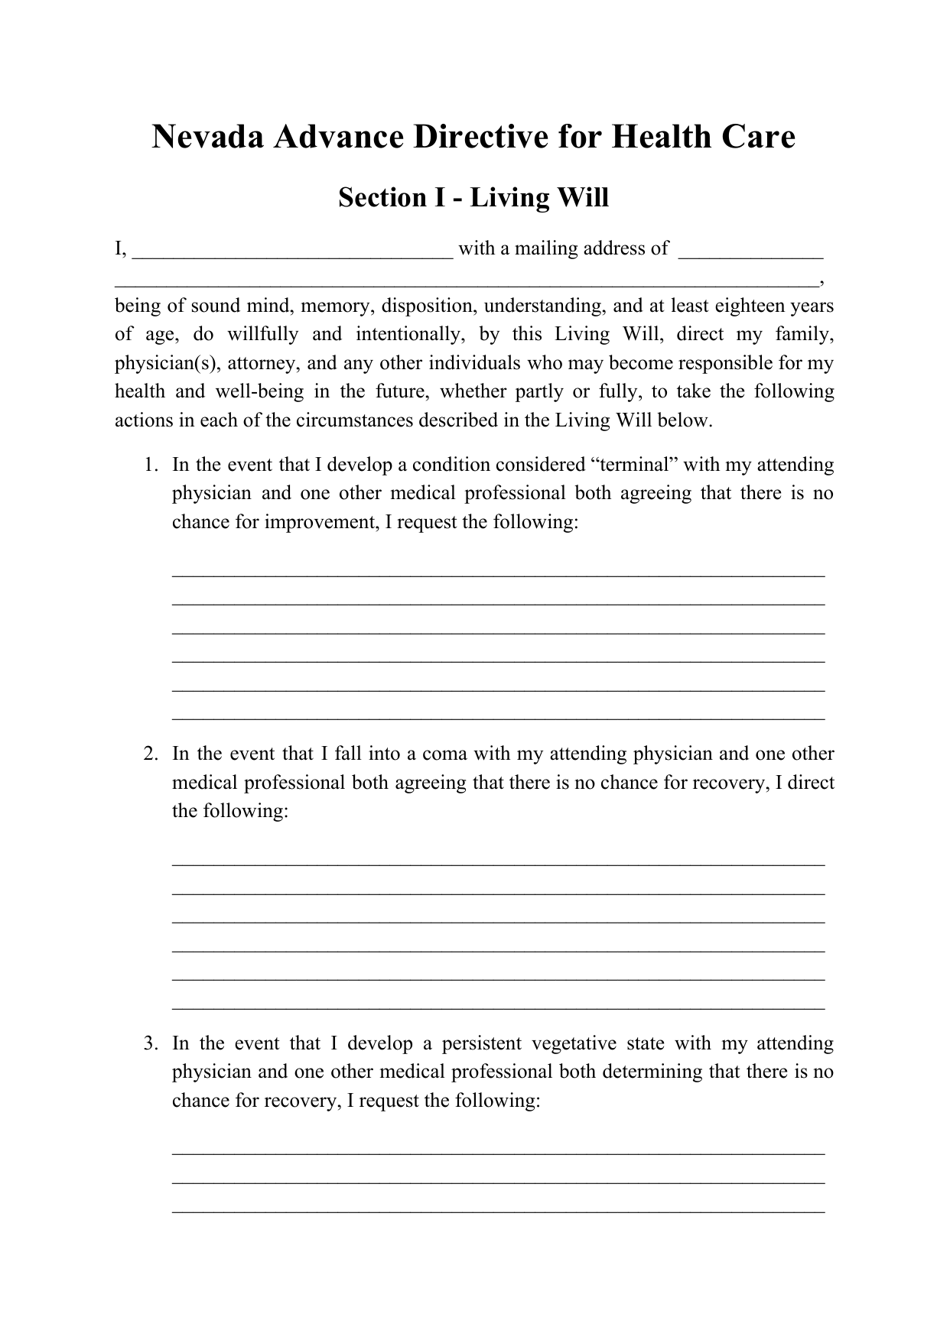 Advance Directive for Health Care Form - Nevada, Page 1